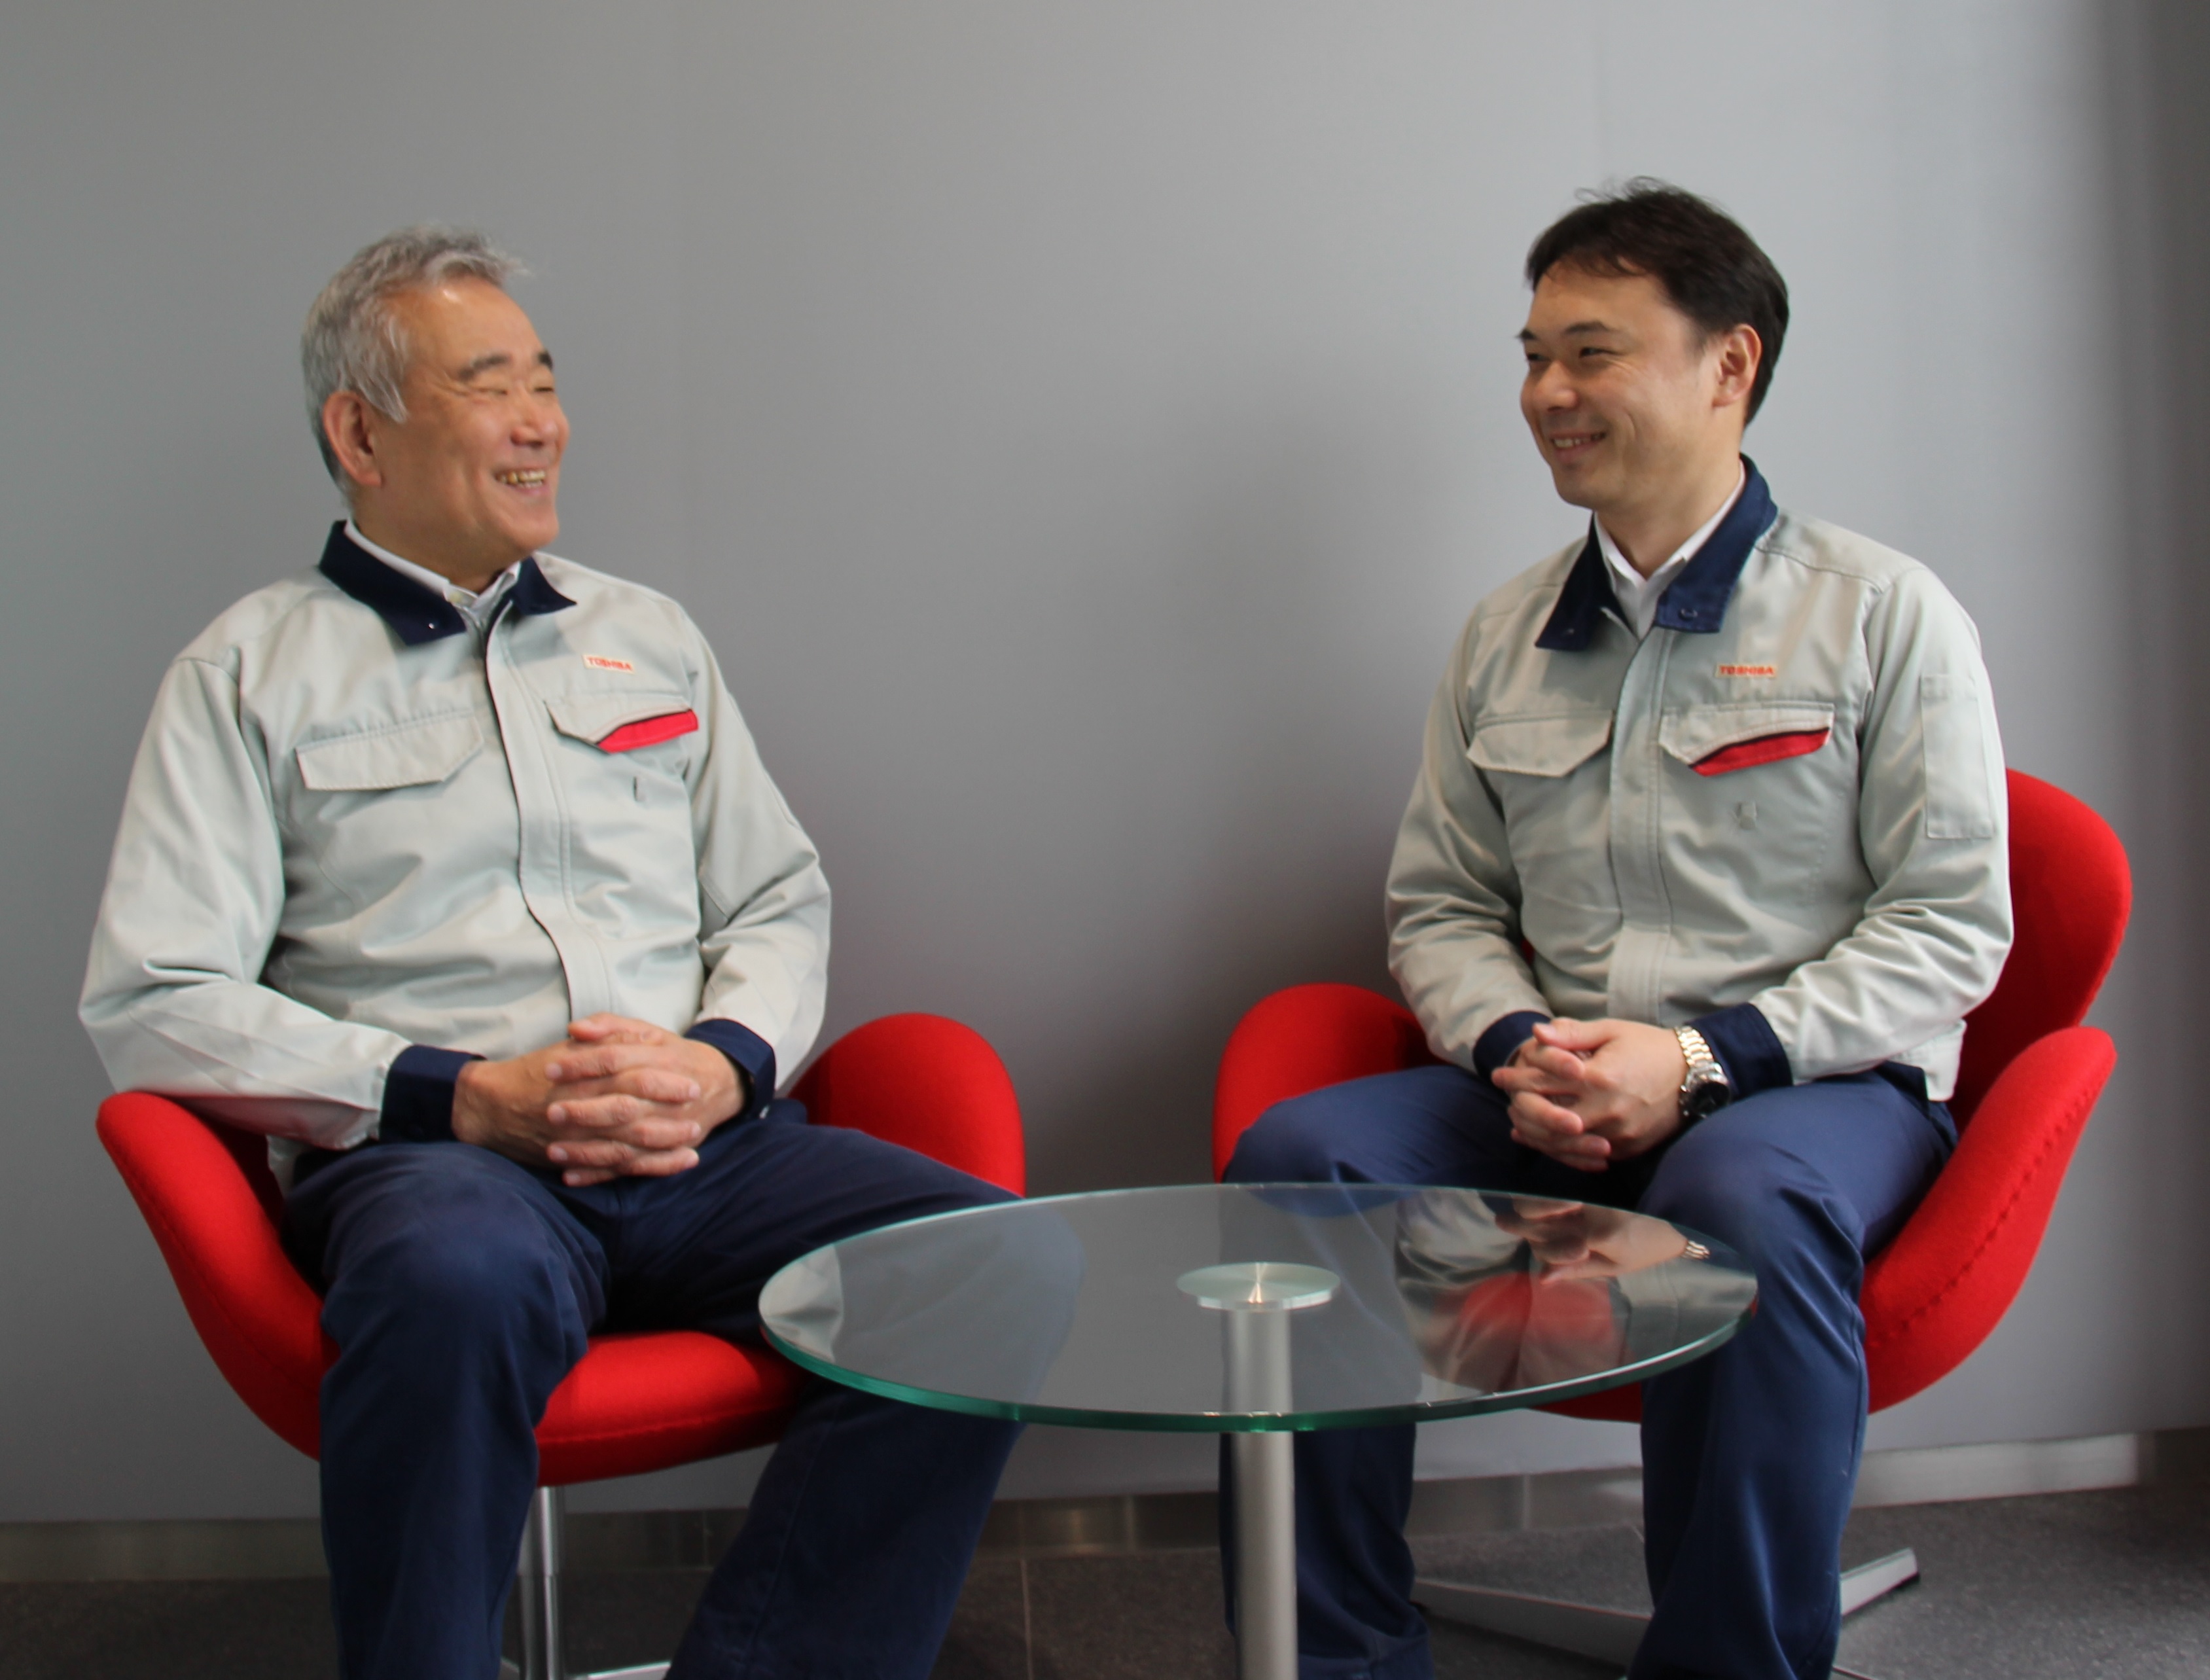 Yukihiro Sumiyoshi(left) and Shohei Takami(right), Nuclear Energy & Machinery Equipment Dept. , Keihin Product Operations , Toshiba Energy Systems & Solutions Corporation  (title at the time of the interview)